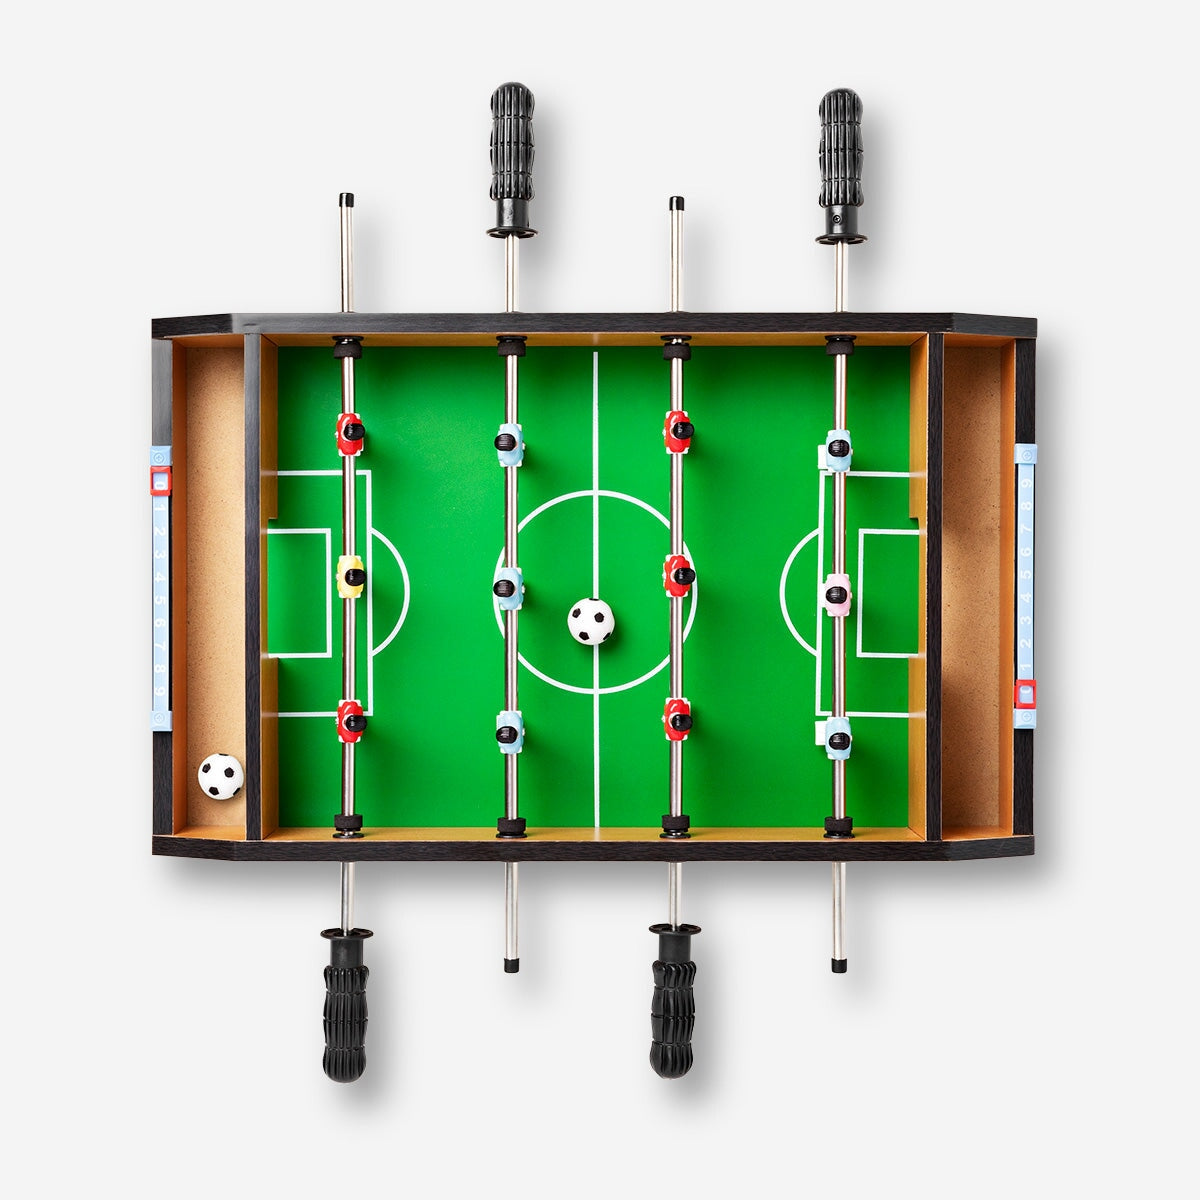 3-in-1 table game. Football, table tennis and shuffleboard Game Flying Tiger Copenhagen 